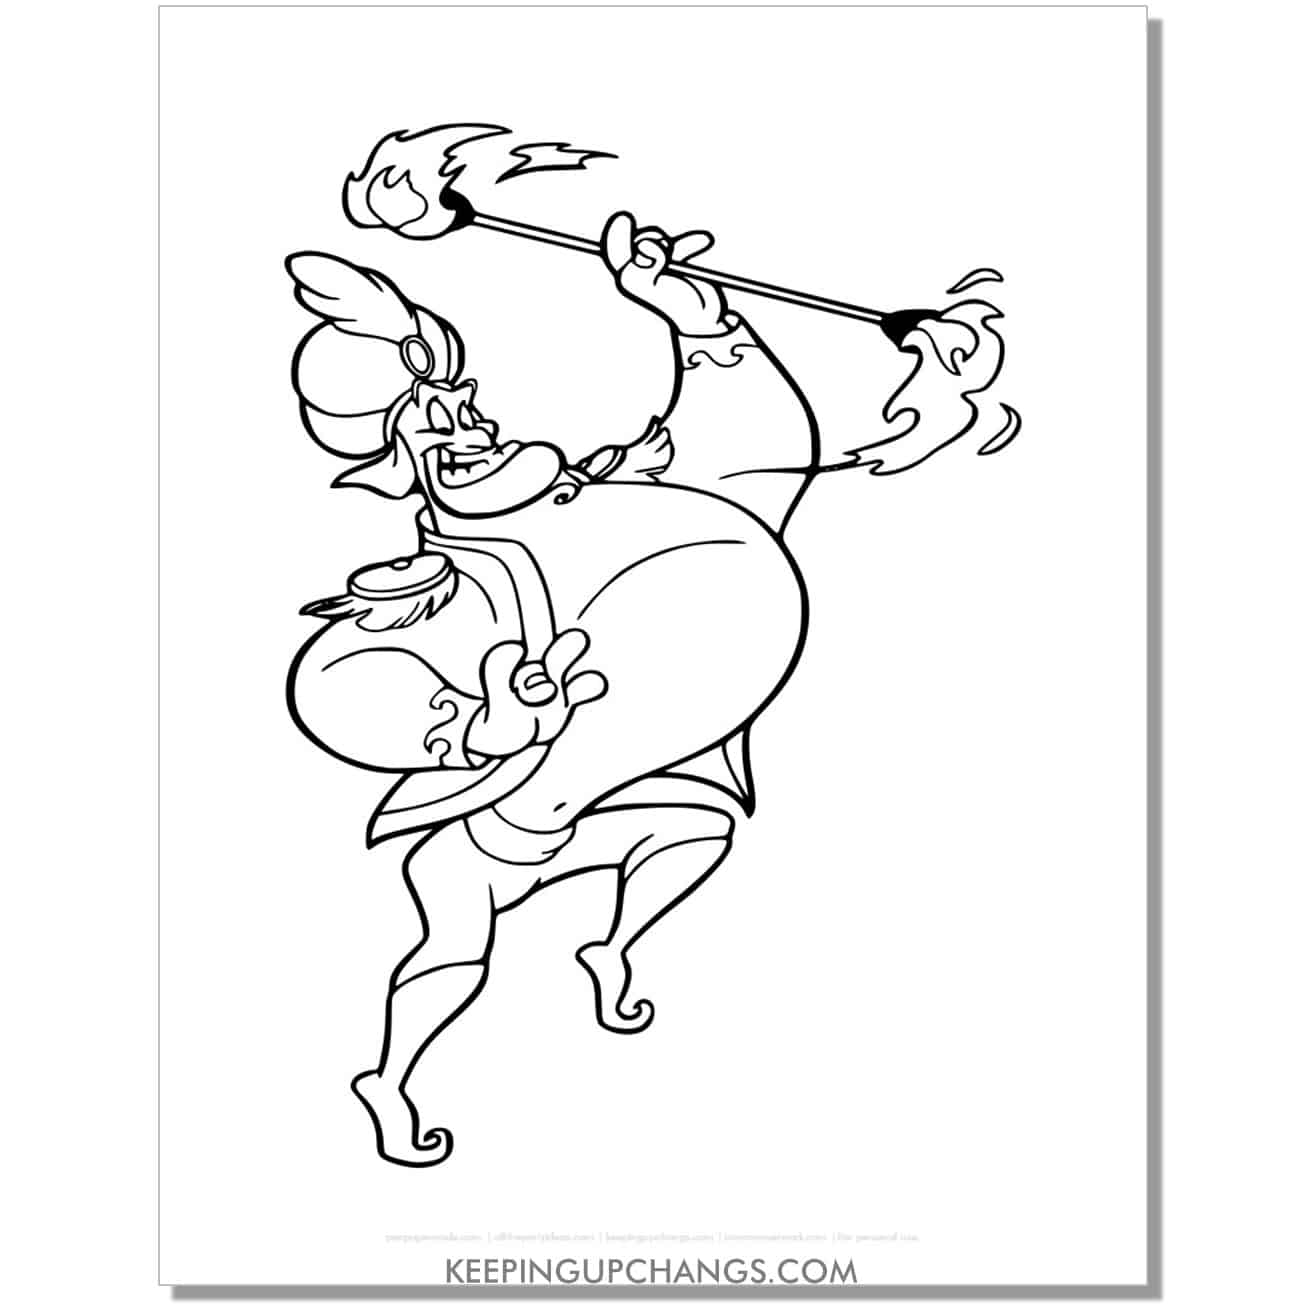 aladdin genie doing fire dance coloring page, sheet.